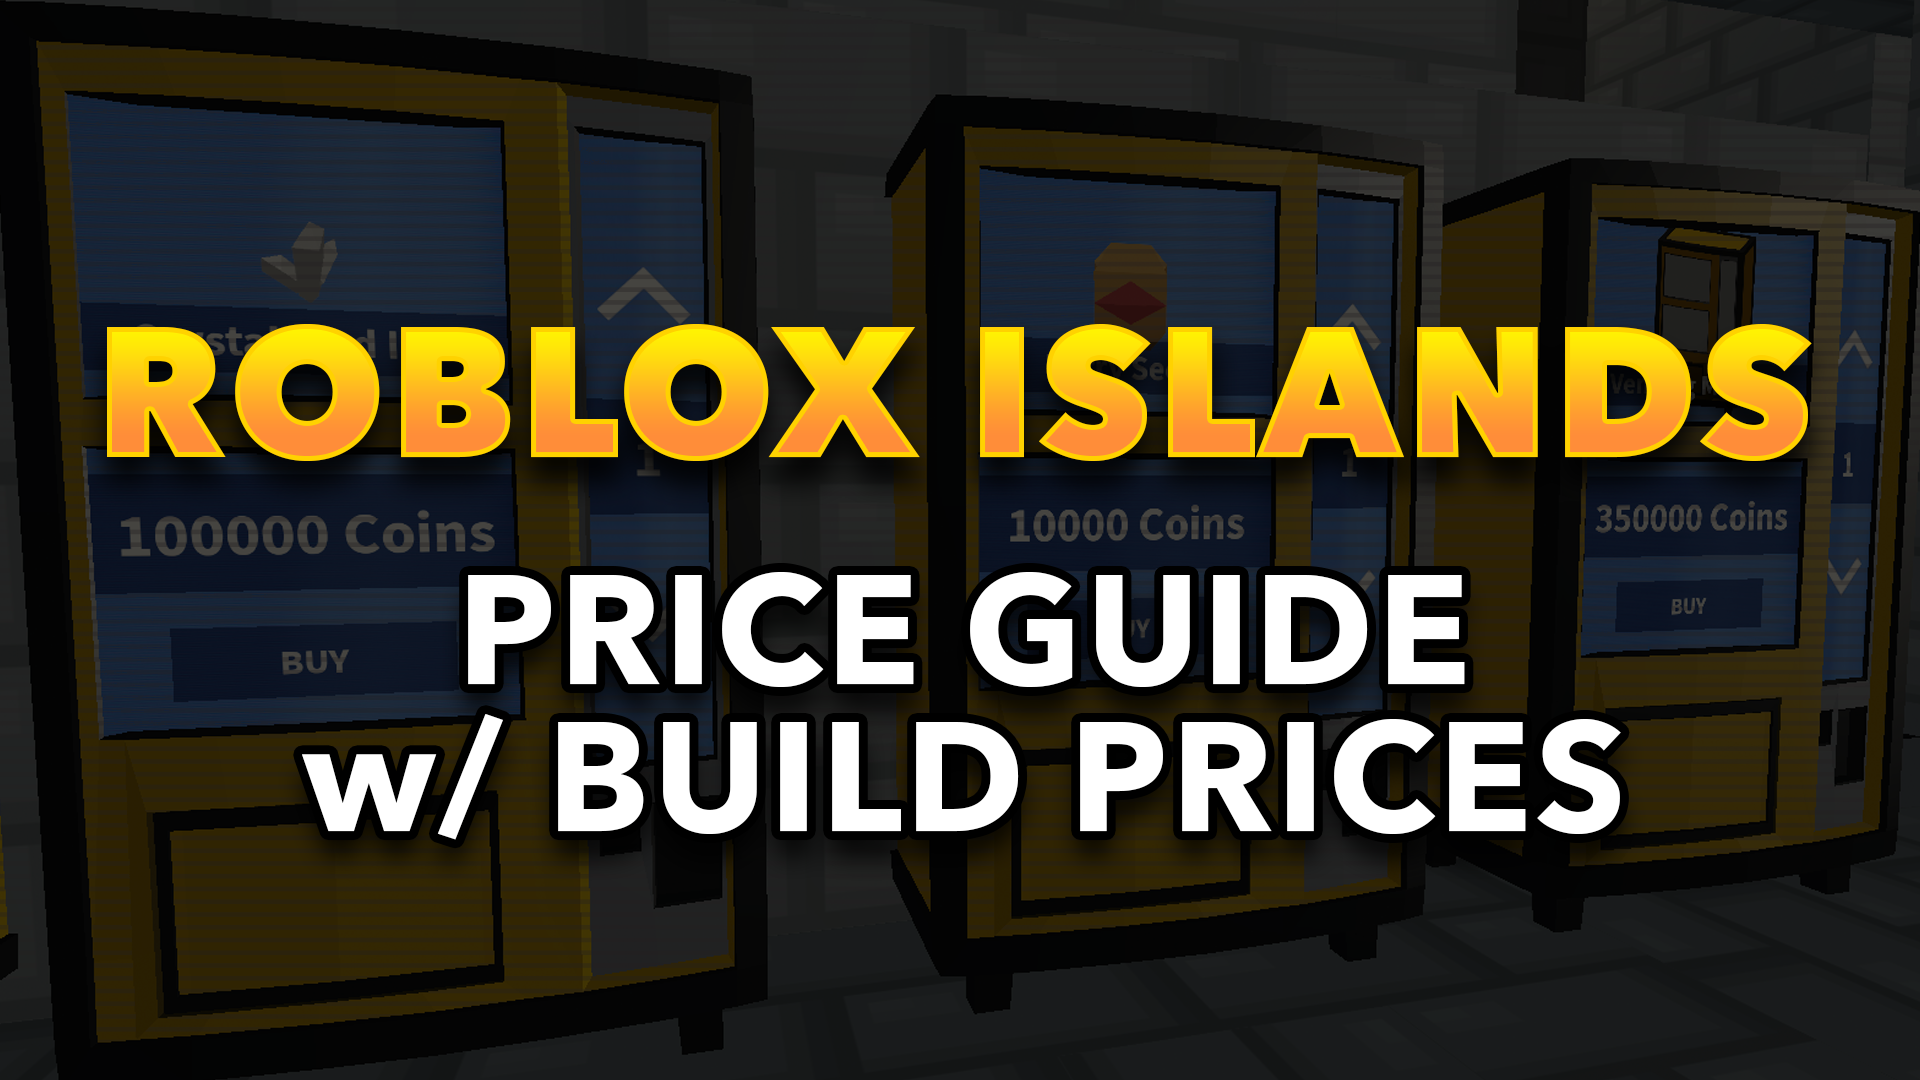 Complete Roblox Islands Price Guide Last Update Sept 20 2020 - roblox how to fish in islands pro game guides